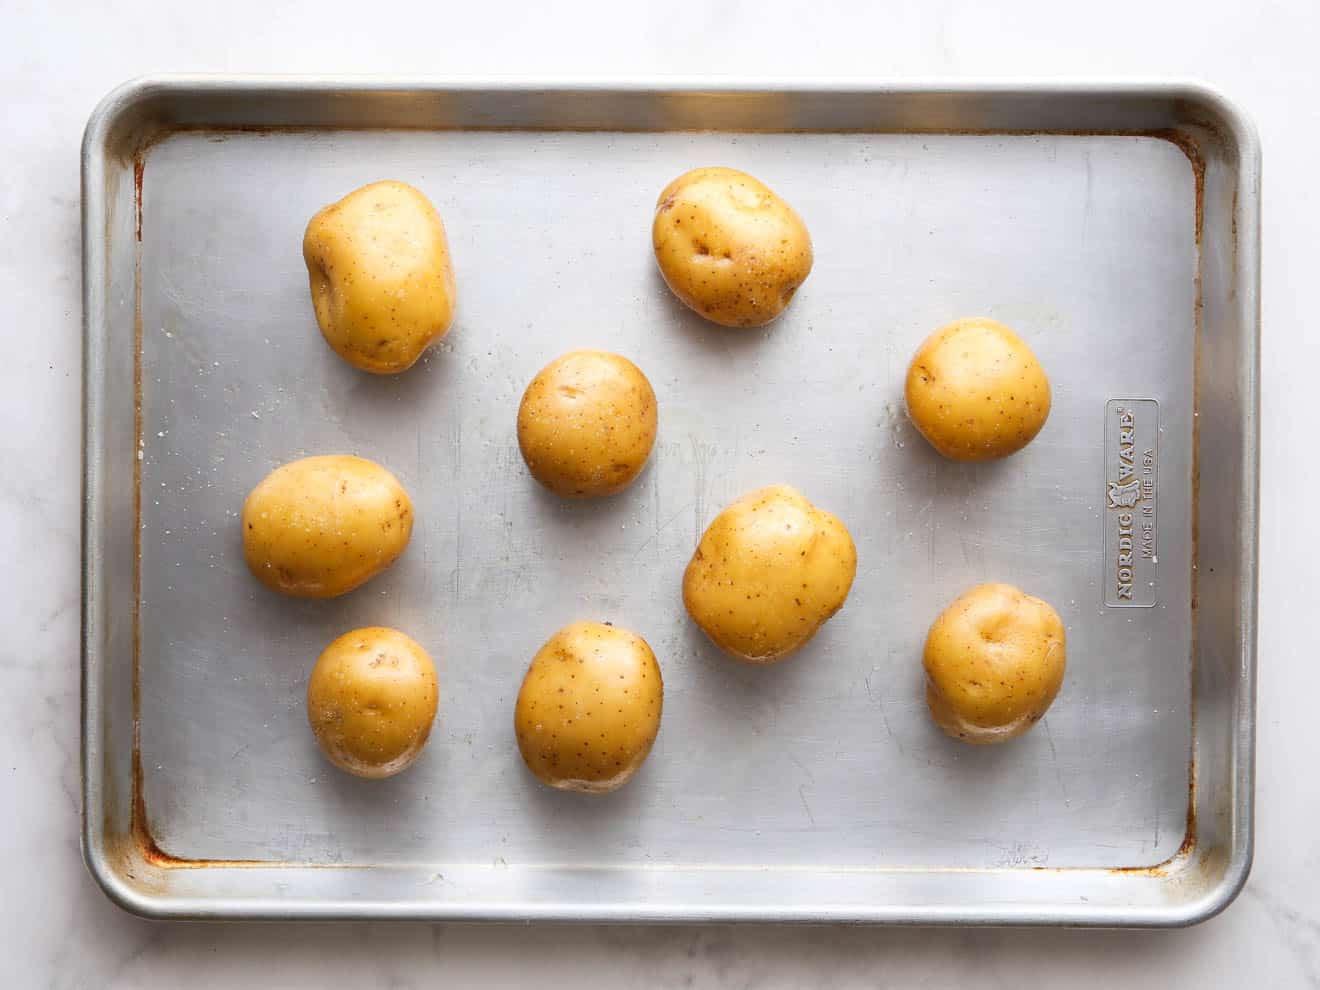 potatoes on a sheet pan ready for roasting